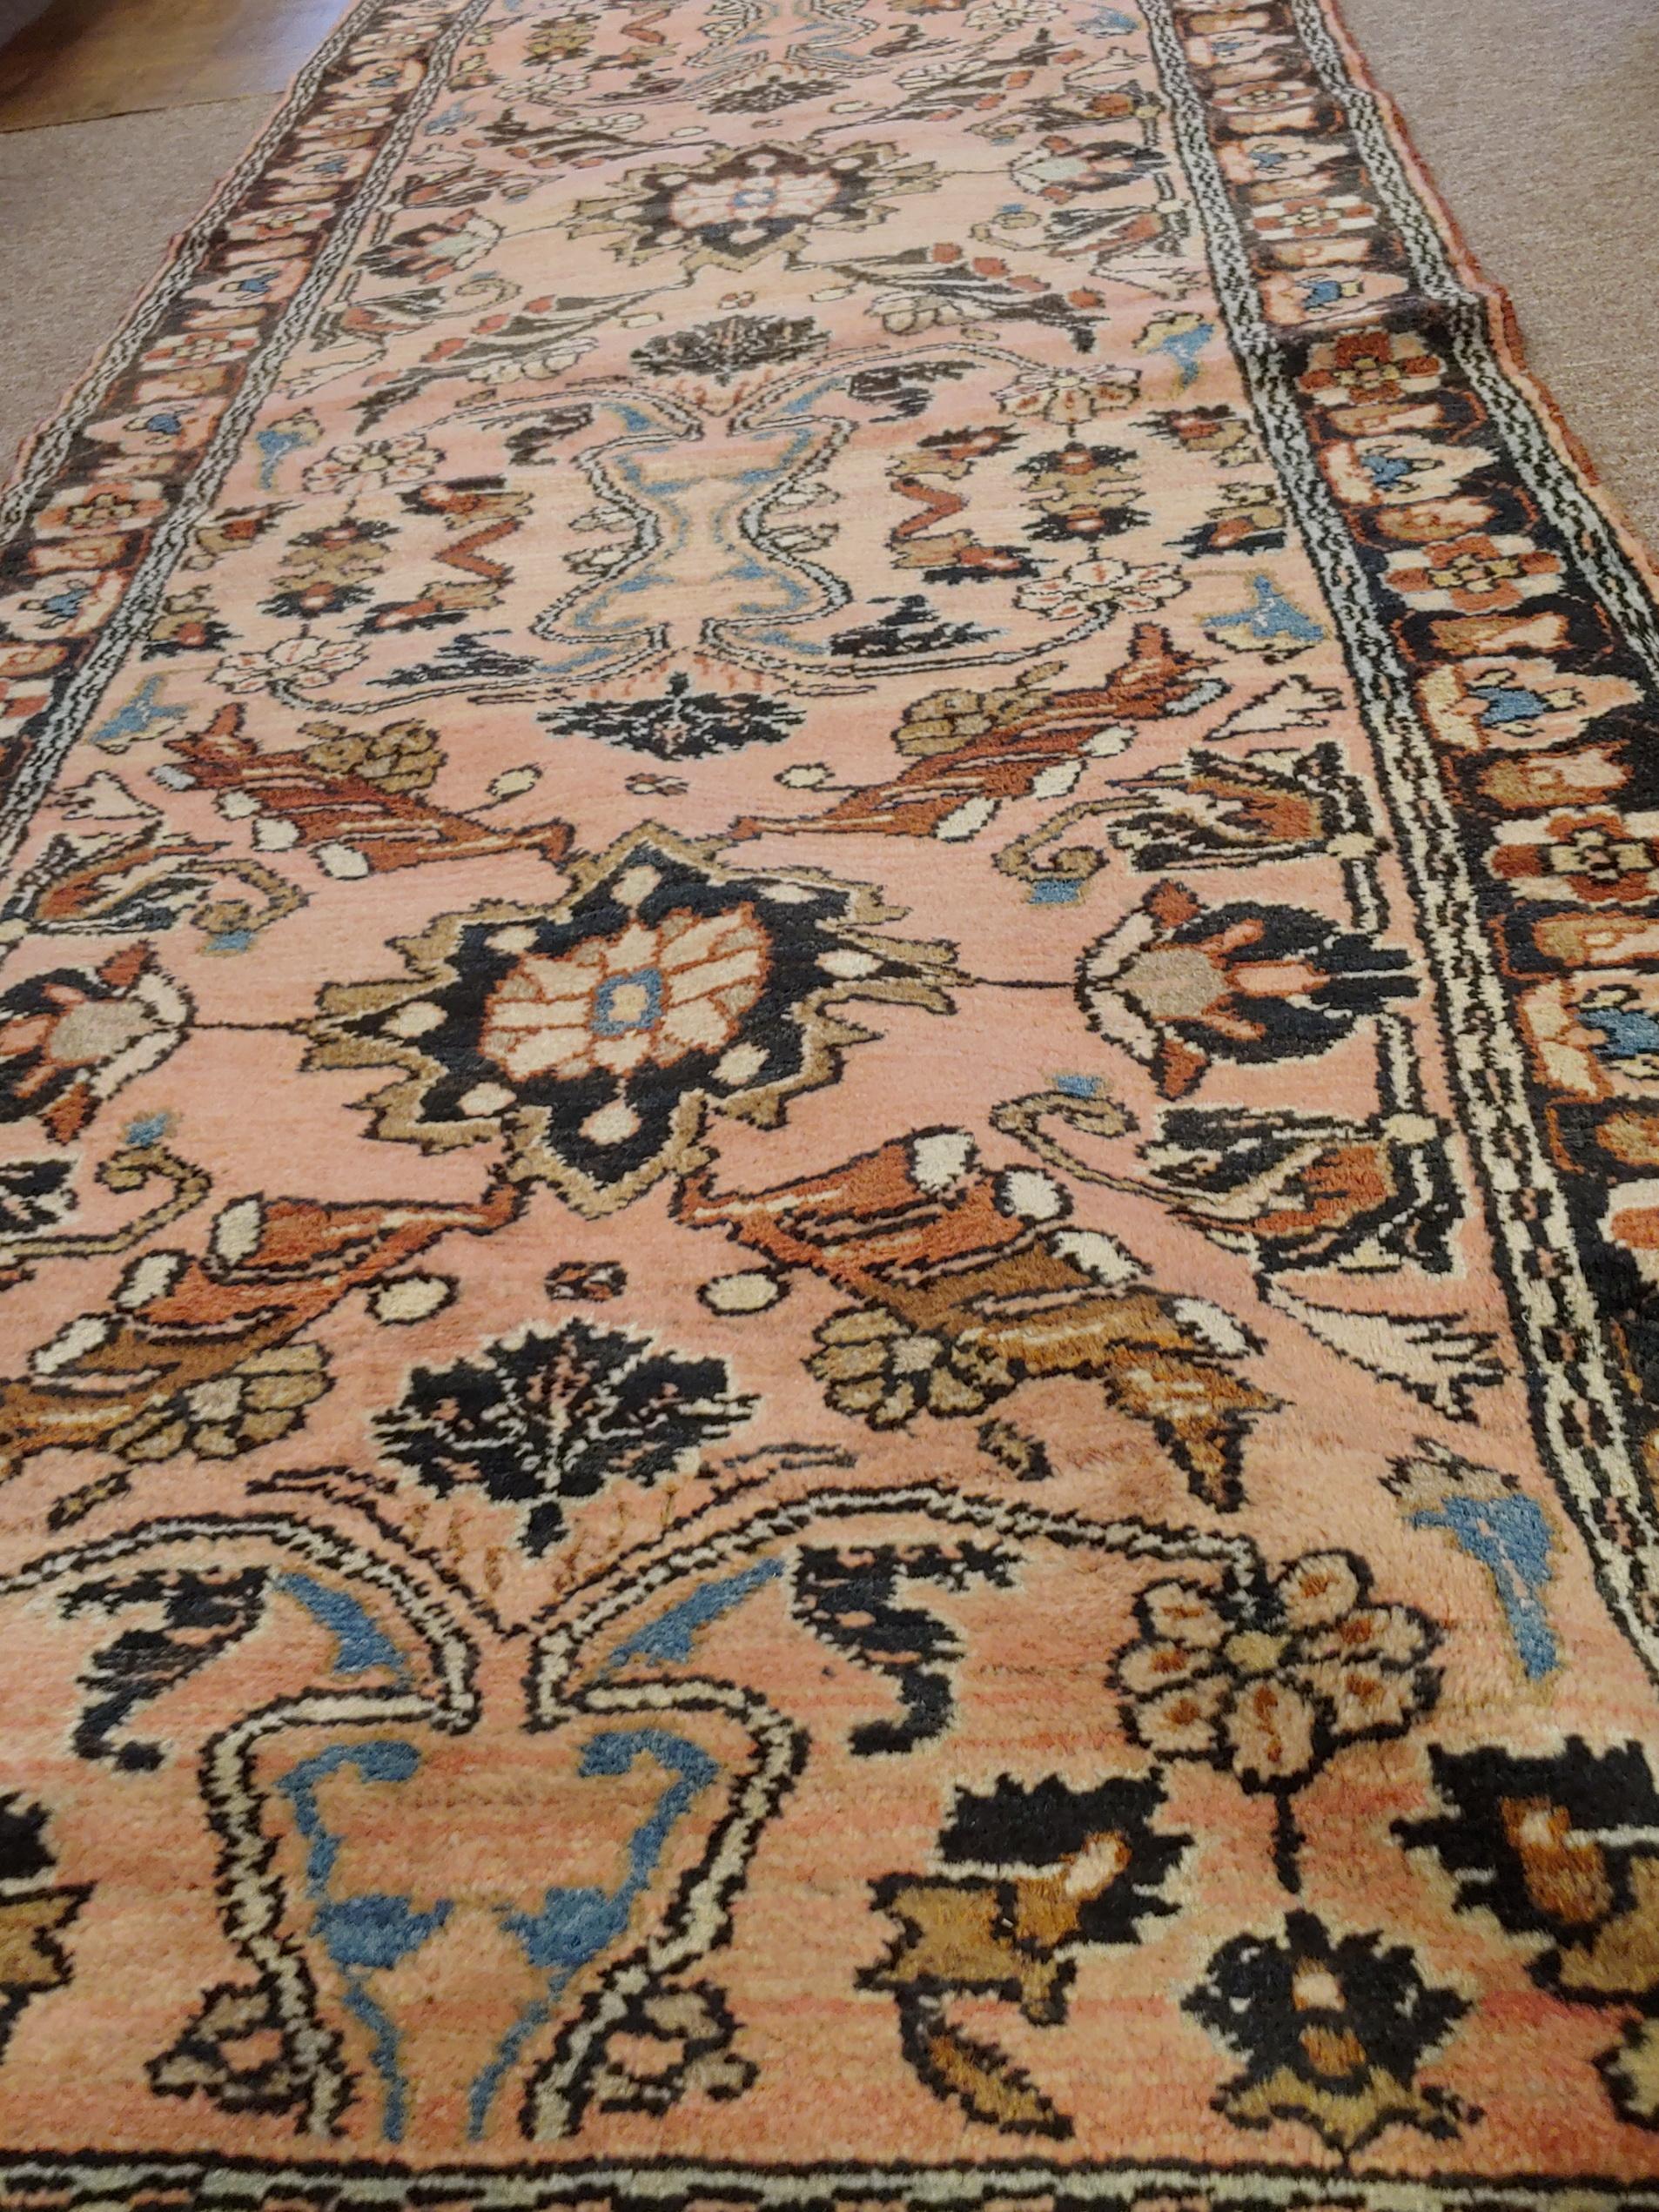 20th Century Antique Persian Lilyhan Rug, Rust/Mauve Colored Field, 1915 runner 2-5x16=4 For Sale